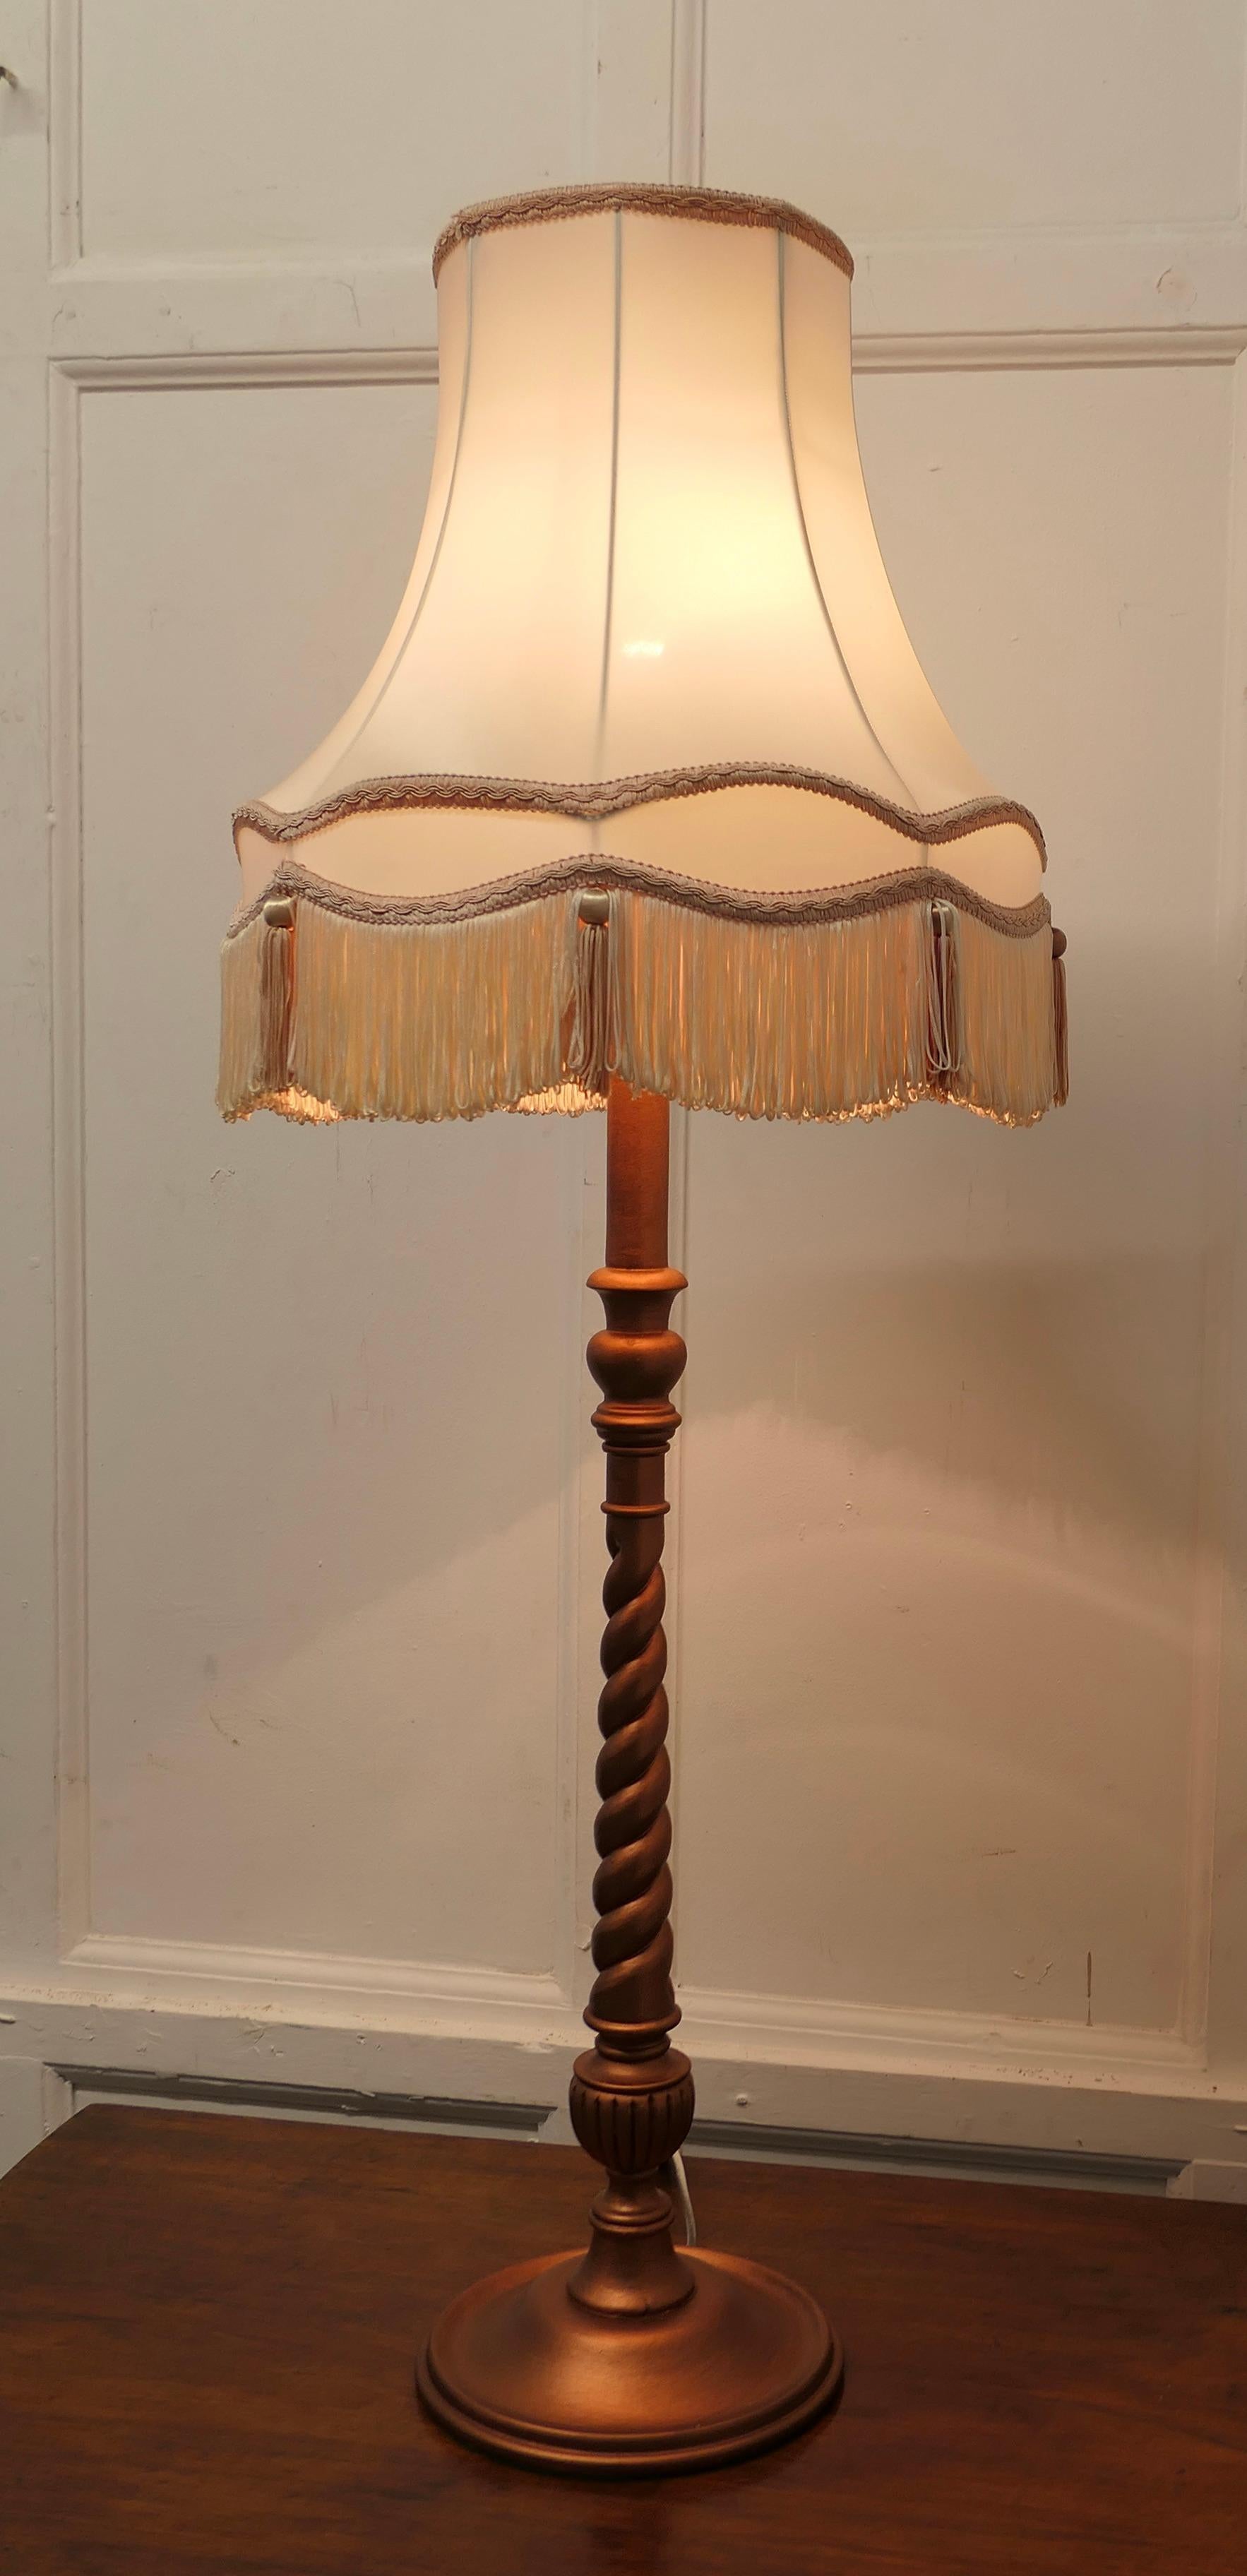 Arts and Crafts Style Half Standard Lamp

This is a very attractive piece, the barley twist turned base of the lamp has a simulated copper finished, and comes with a scalloped and tasseled shade
The lamp is in good condition and working 

The